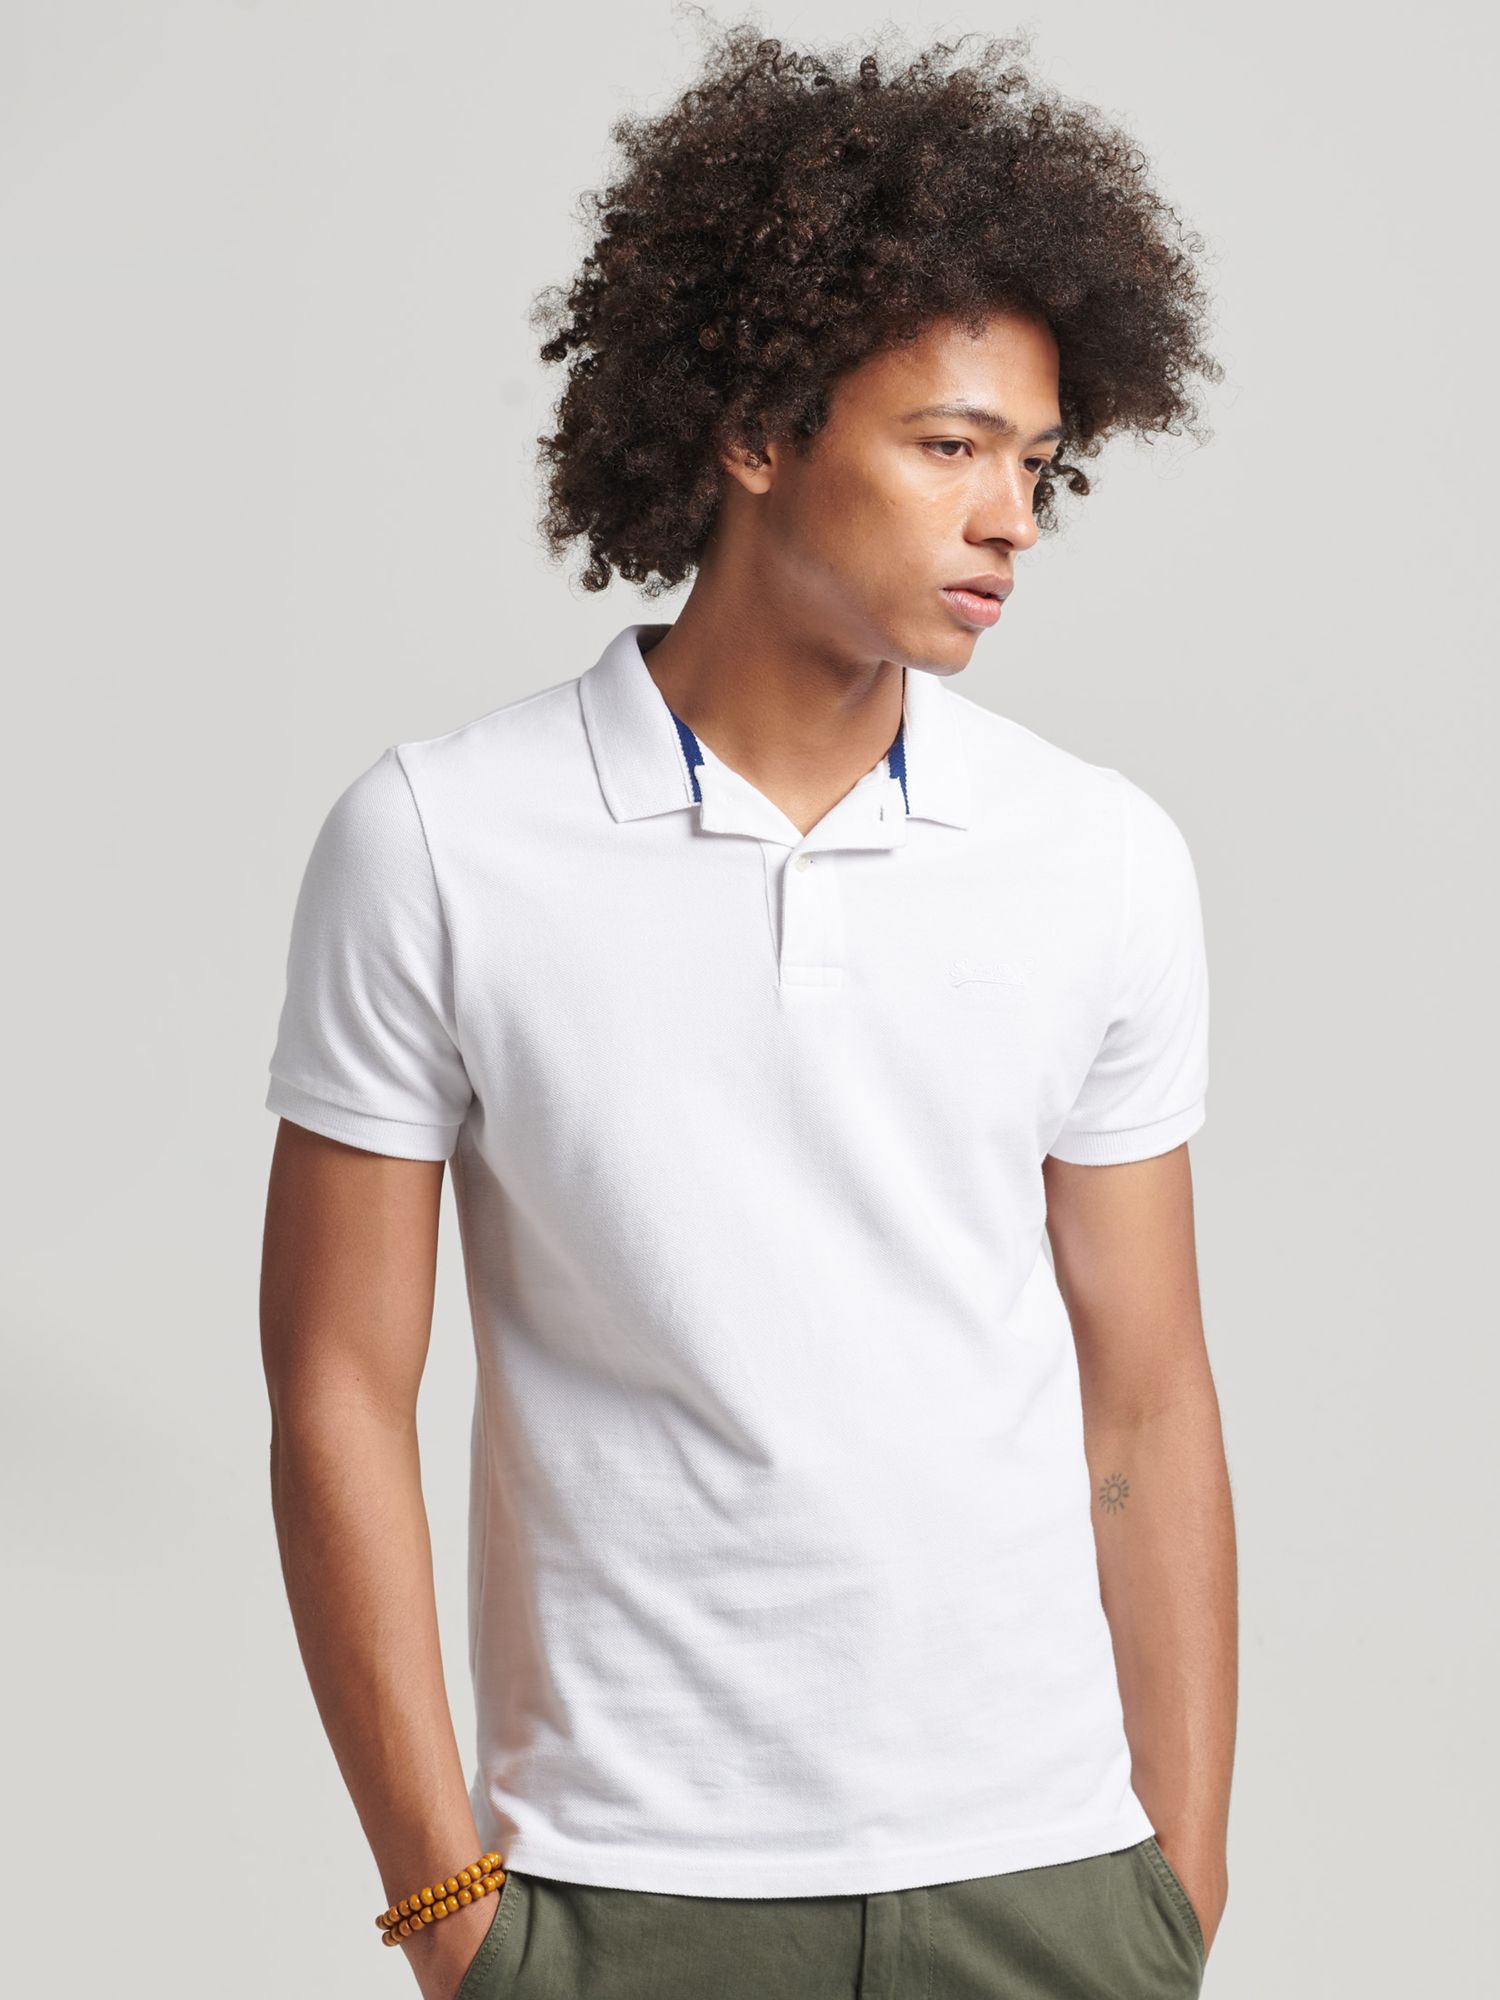 Classic John Superdry Lewis Optic at & Polo Shirt, Partners Pique